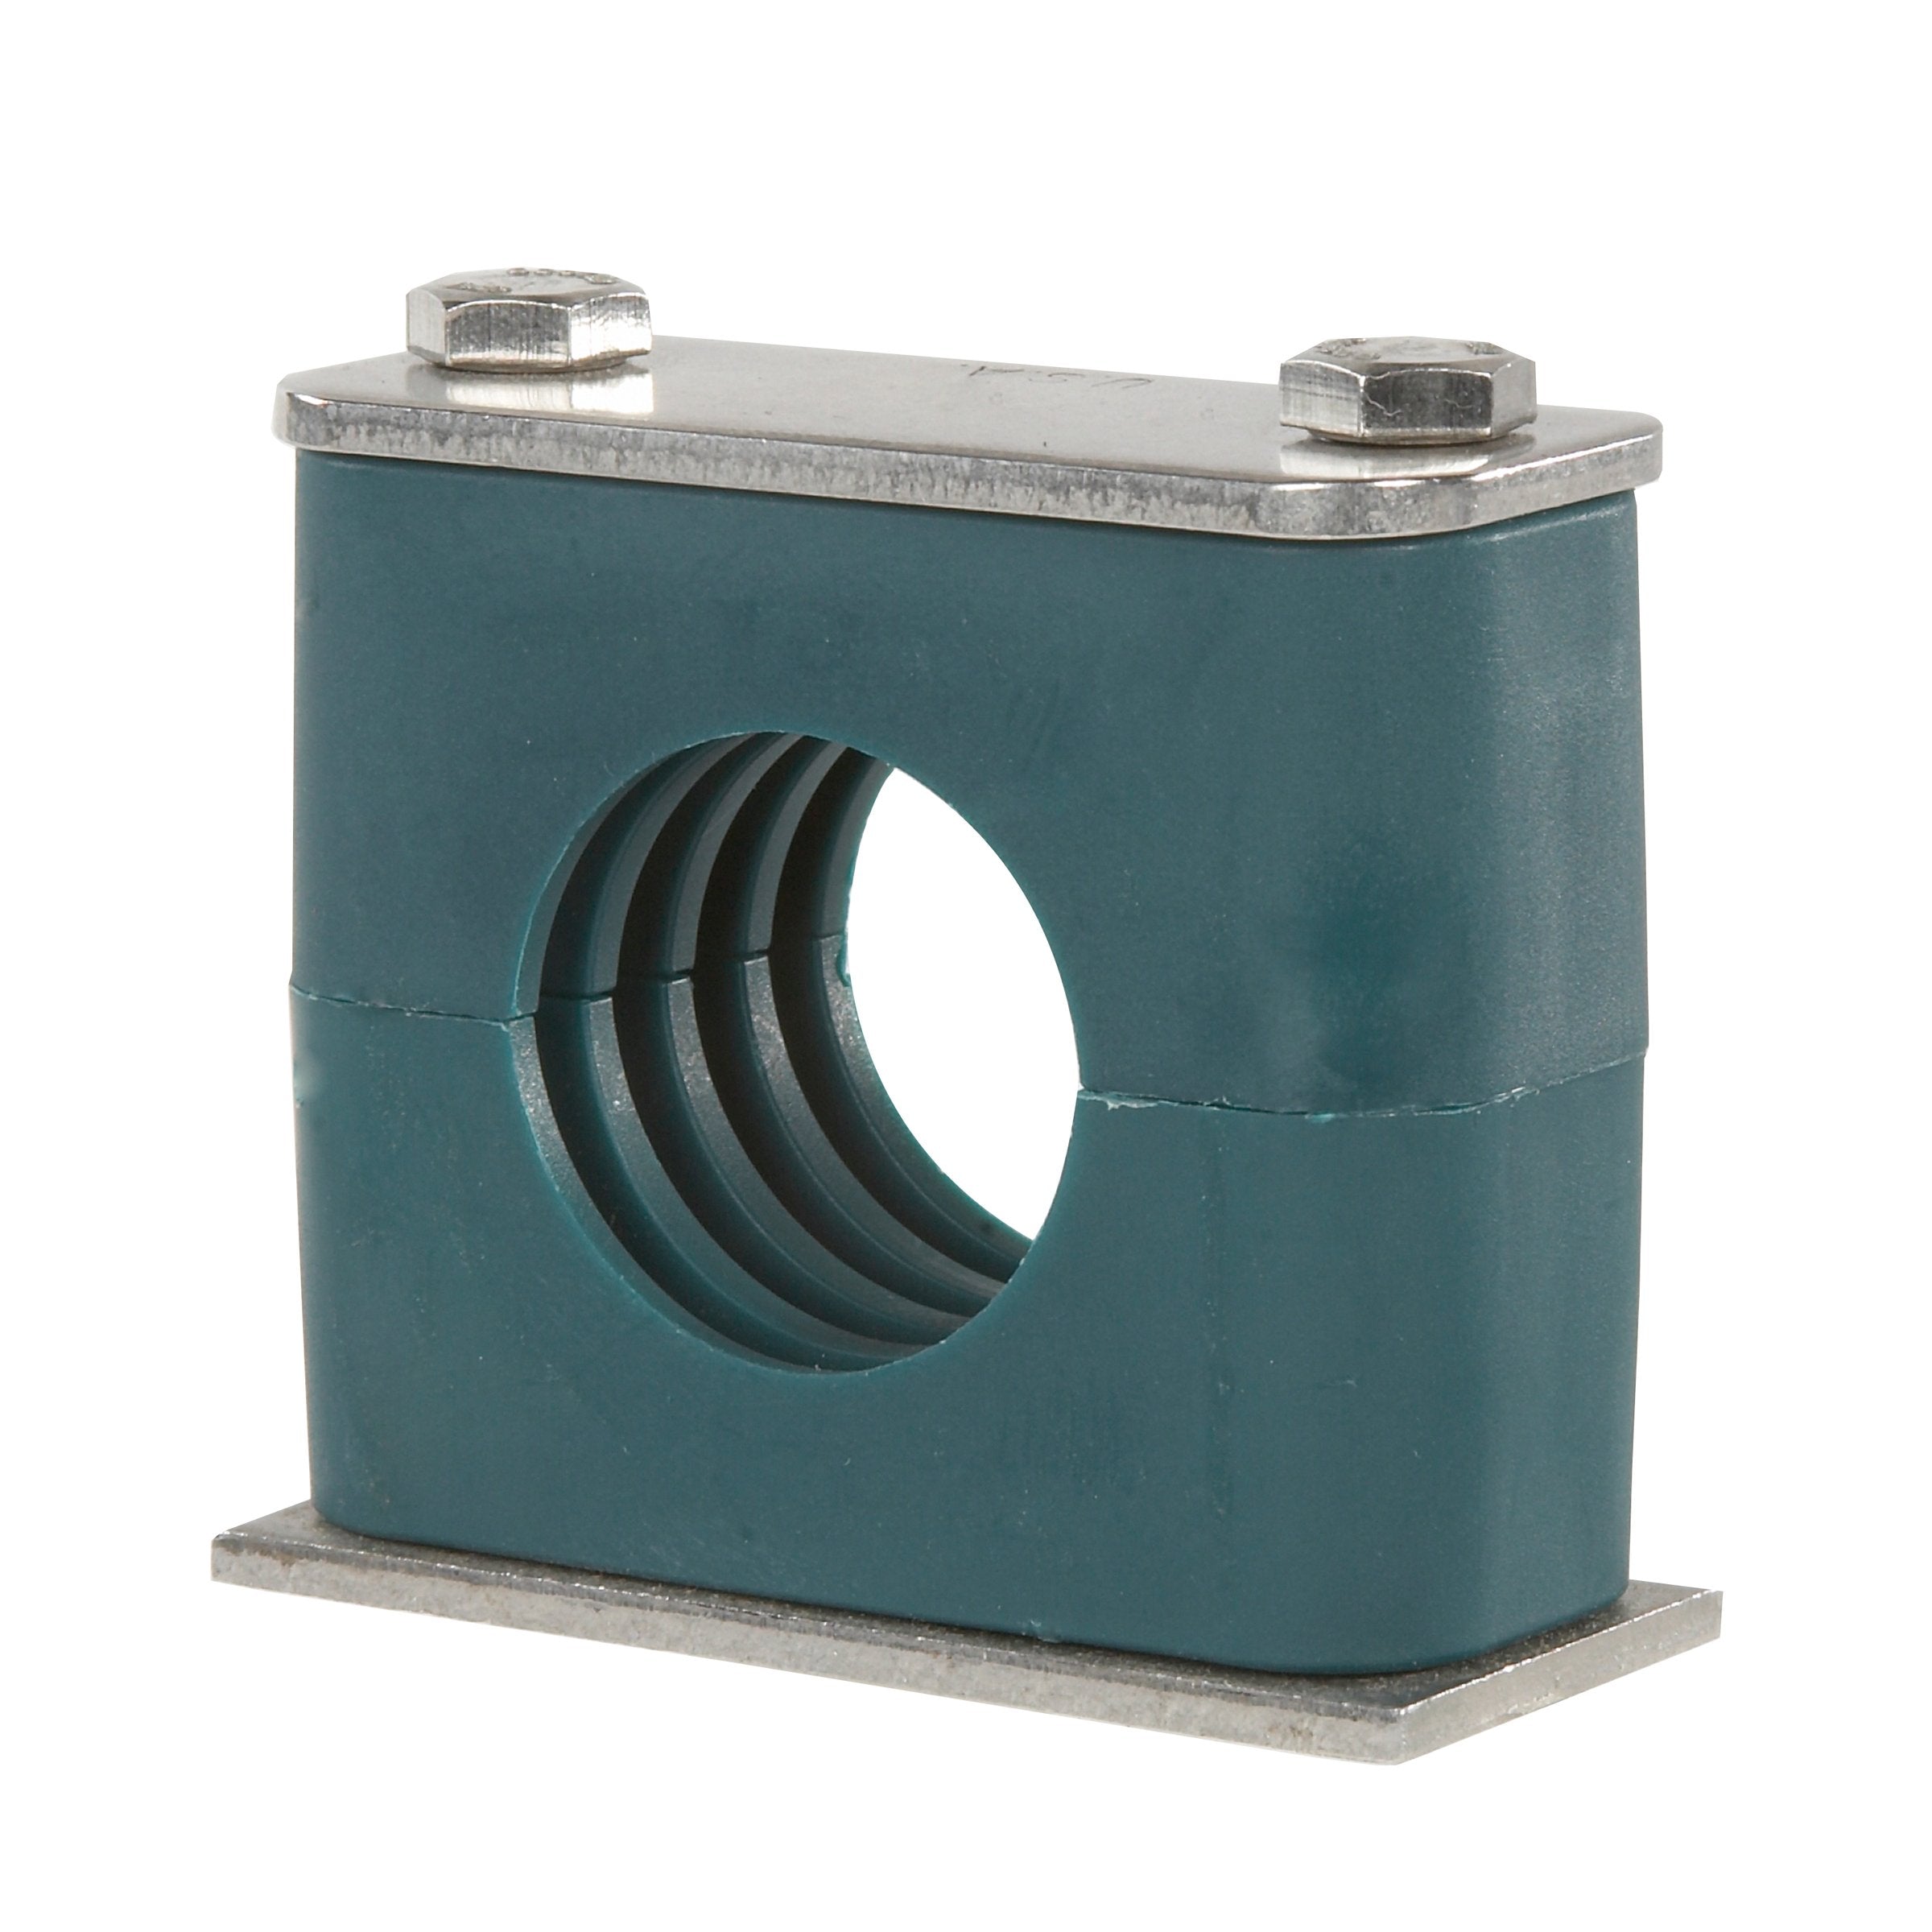 SP-644.5-PP-DP-AS-U-W10 : Stauff Clamp, Single Weld Plate, 1.75 inch (45.5mm) OD, for 1.75" Tube, Green PP Insert, Profiled Interior, Carbon Steel